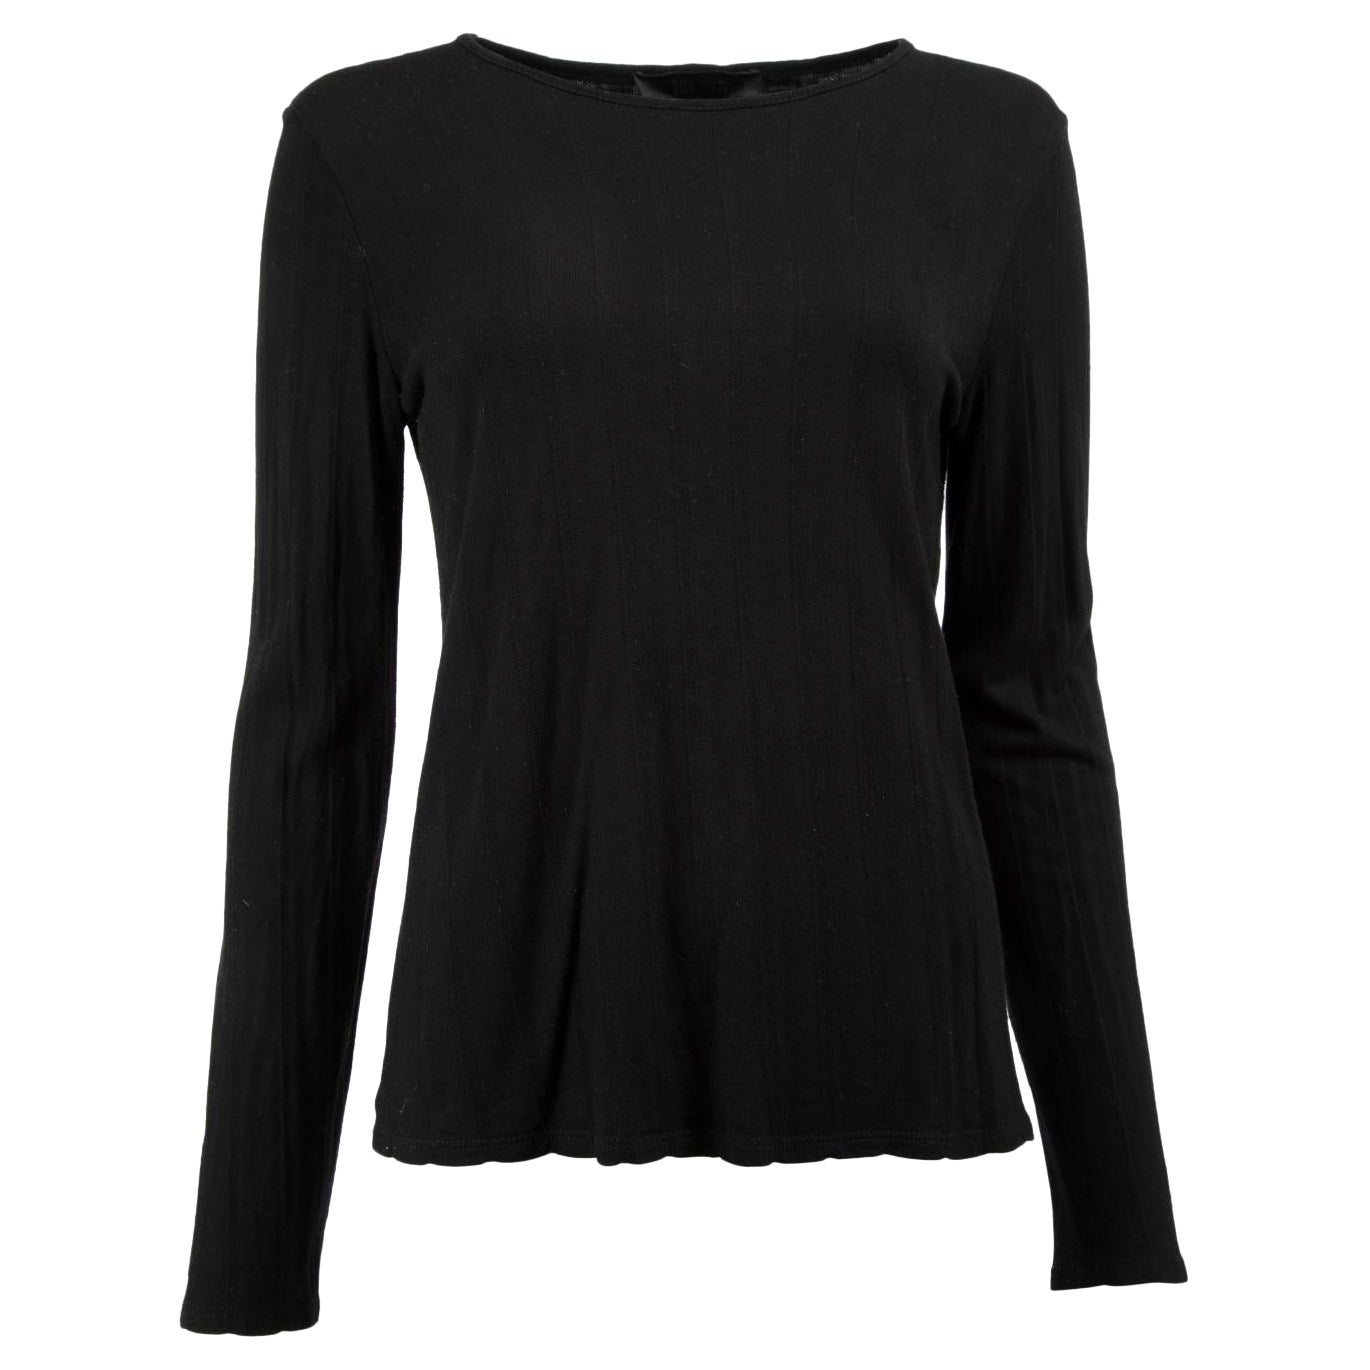 Black Long Sleeve Top Size M For Sale